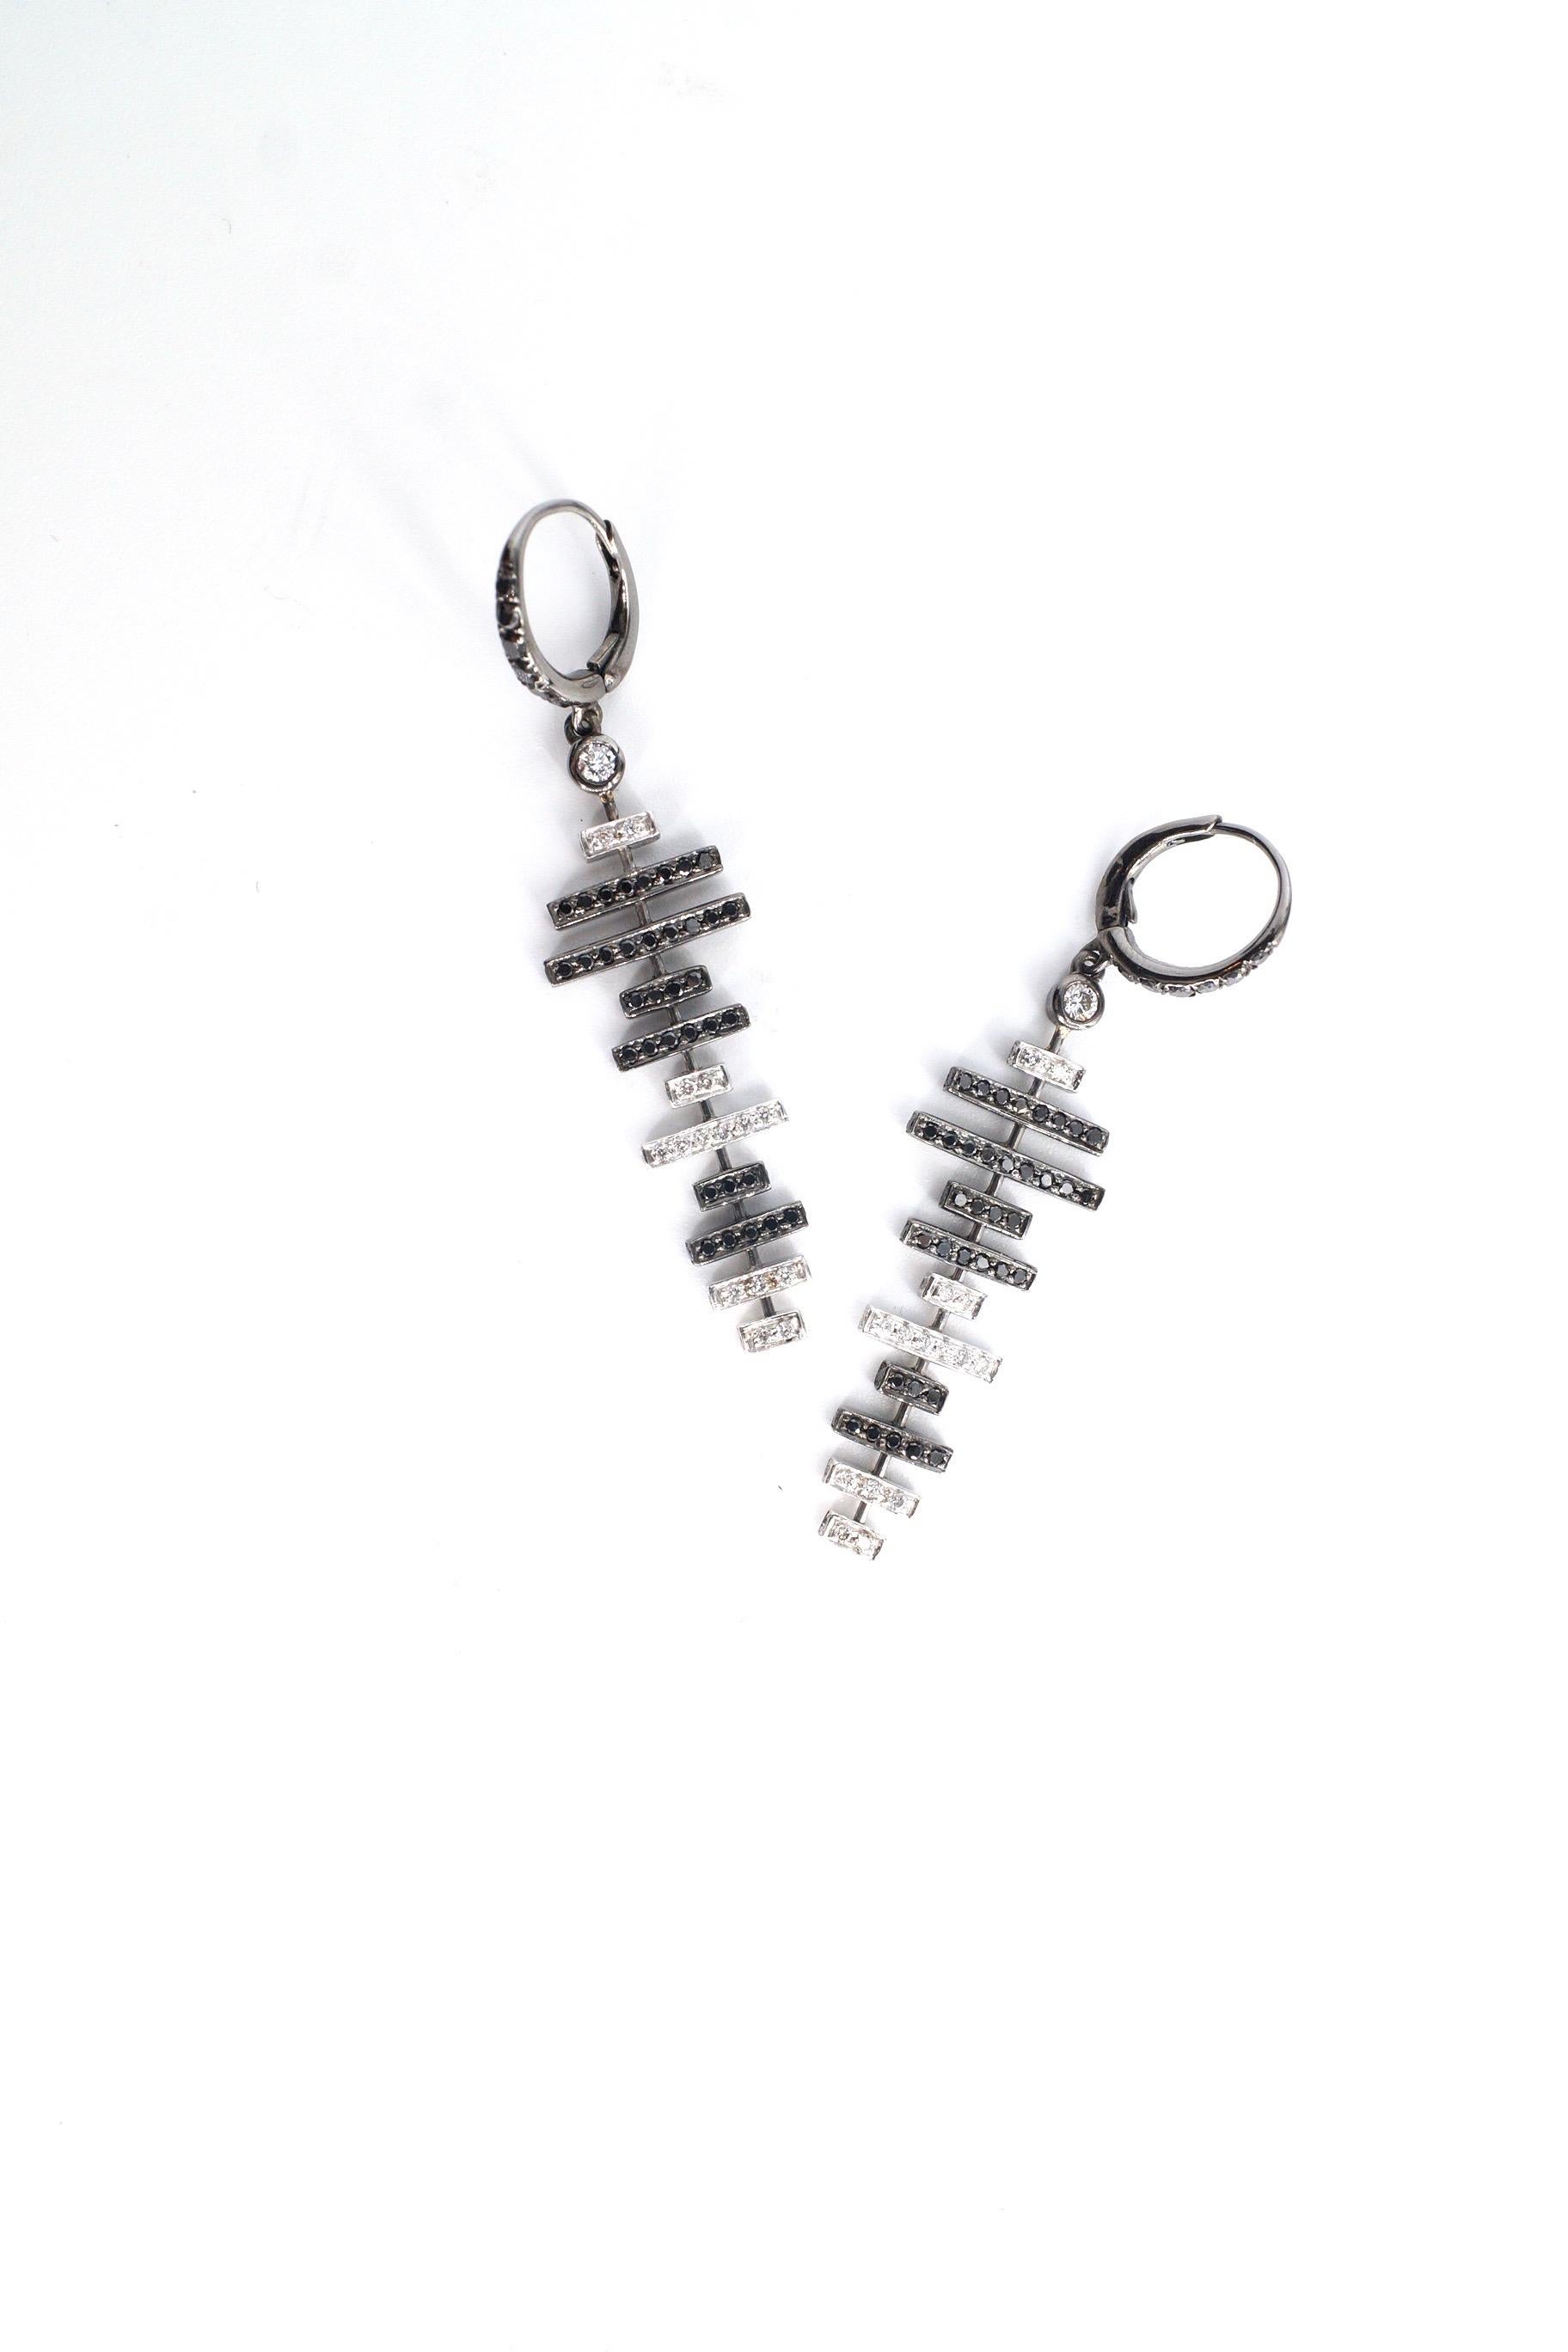 Zyla Earrings
A pair of eighteen-karat blackened white gold vertical earrings, suspended from a black diamond encrusted earwire. Each beginning with a round white diamond, the earrings then consist of eleven horizontal lines of varying sizes, either